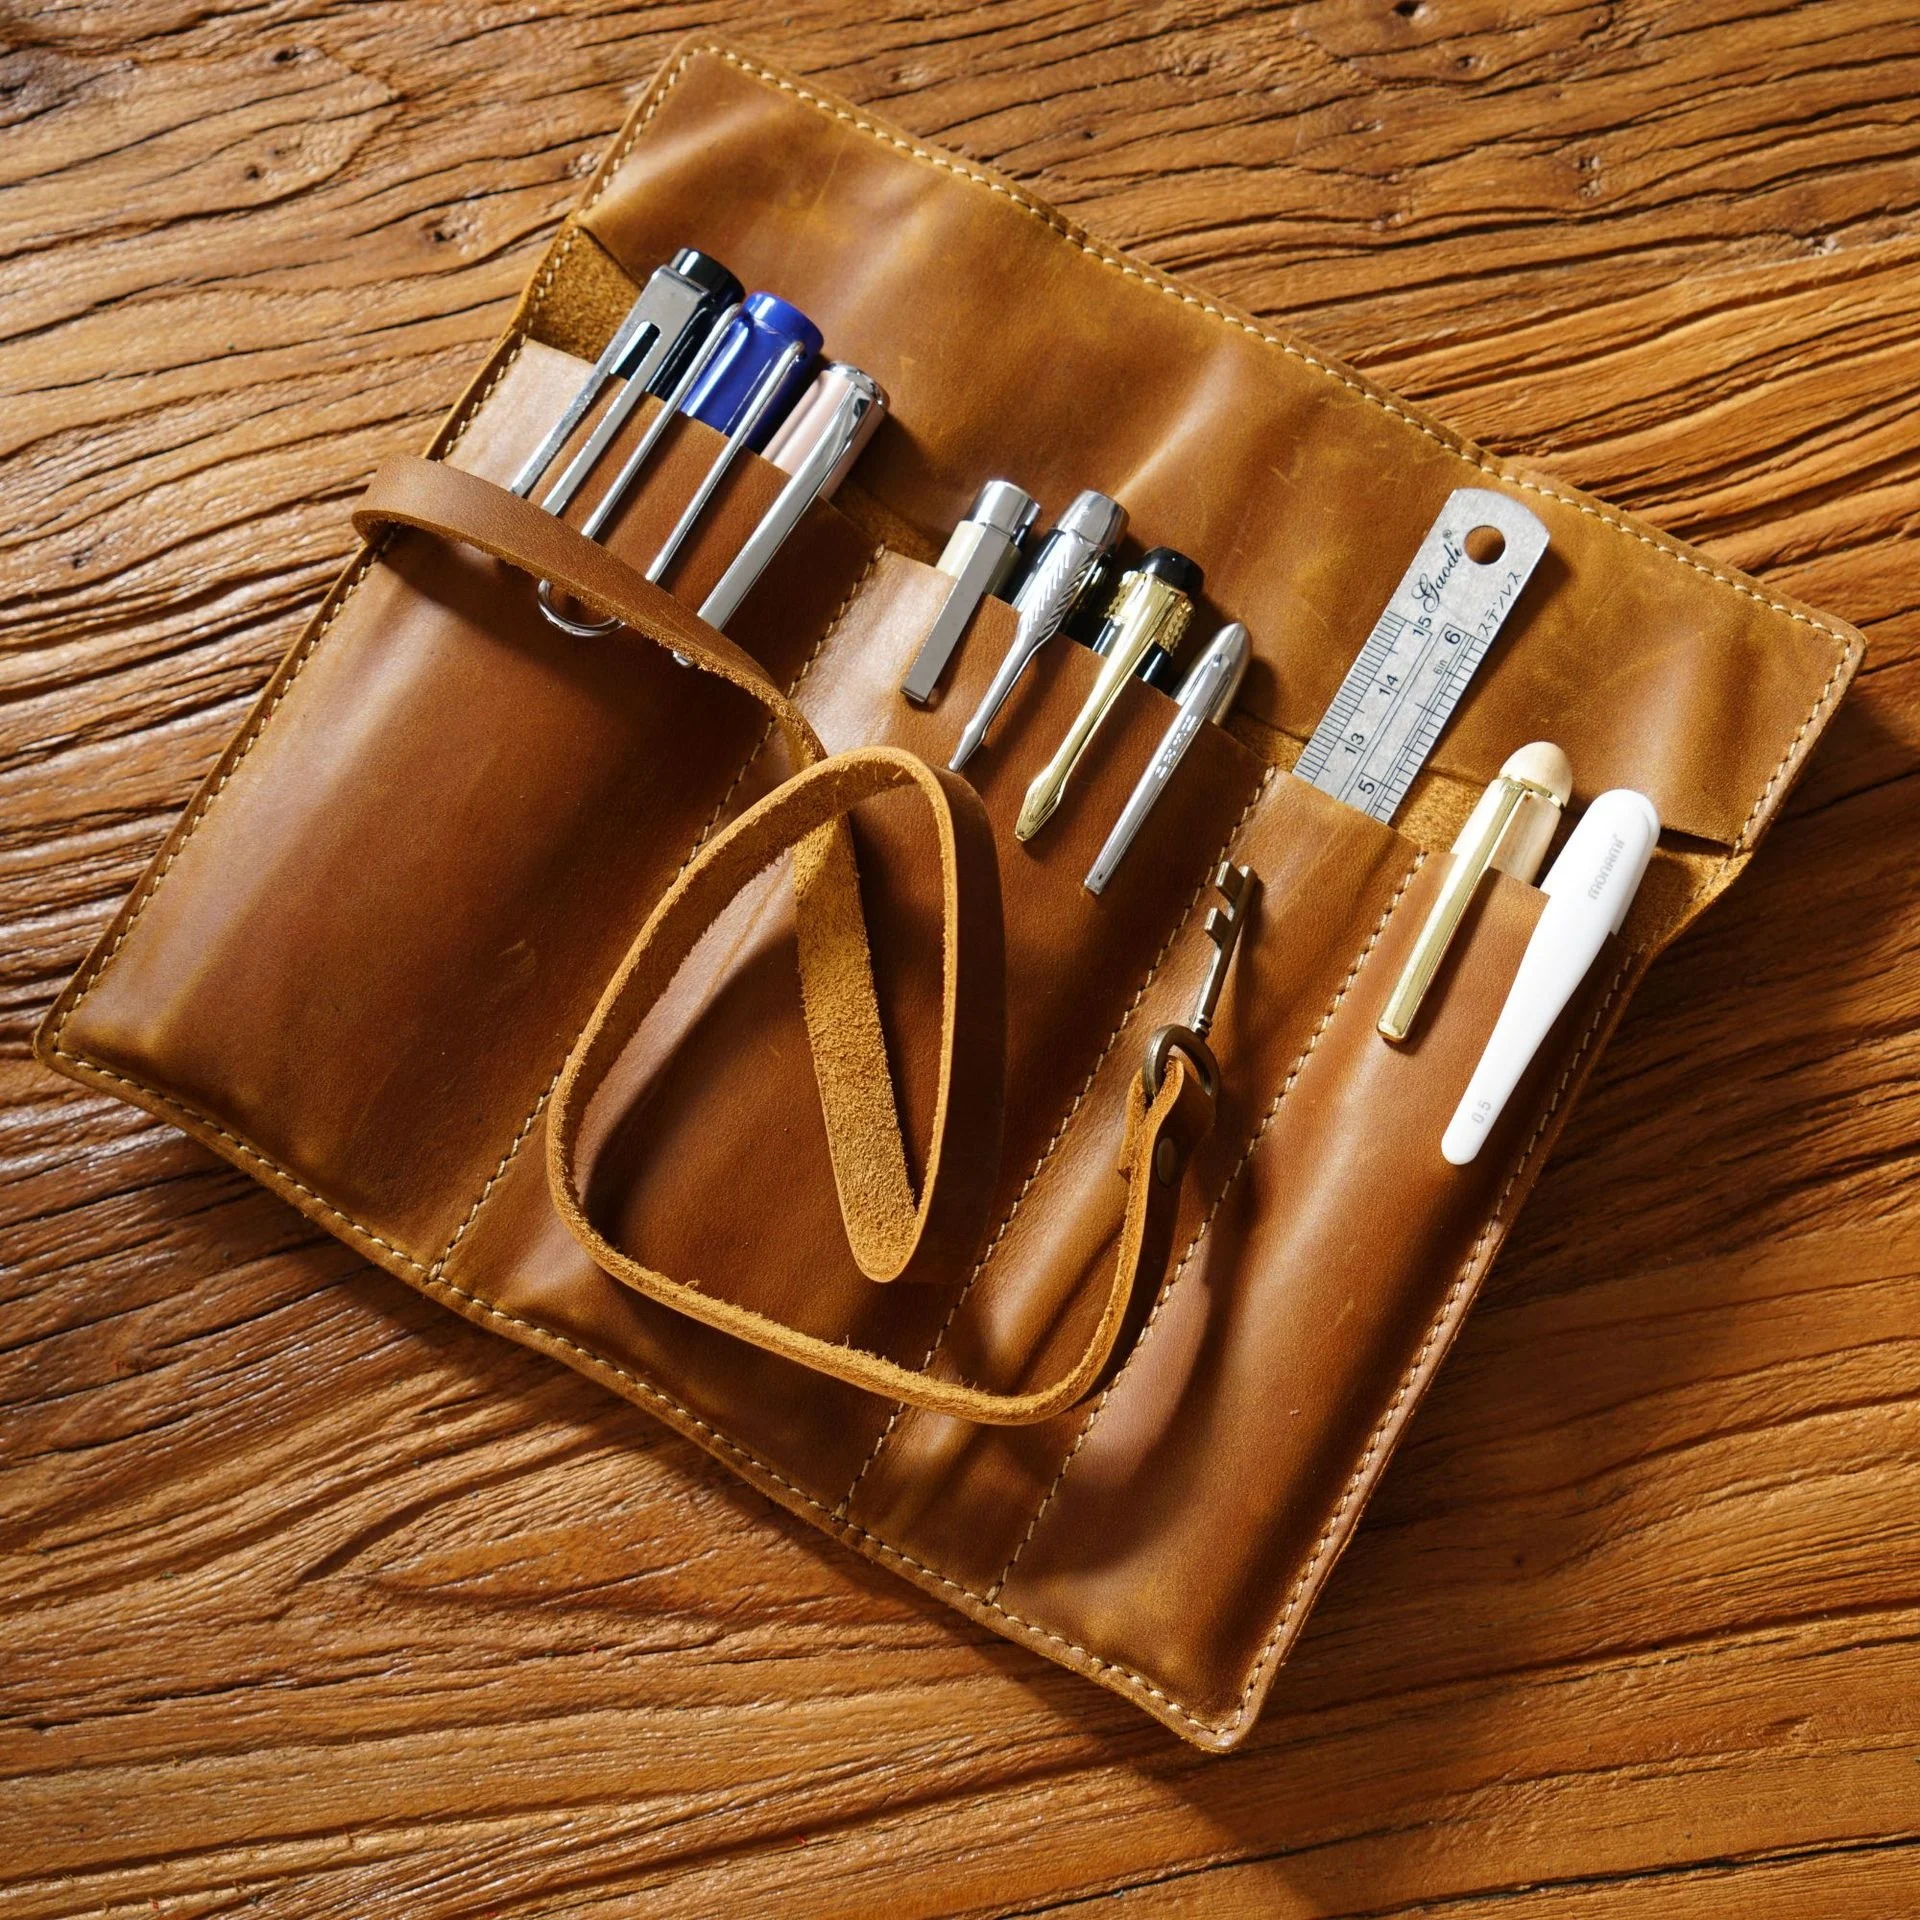 Genuine Leather Pencil Case Tie Rope With Key Pens Bag Retro School Office Stationery Student Storage Bags Handmade Gift